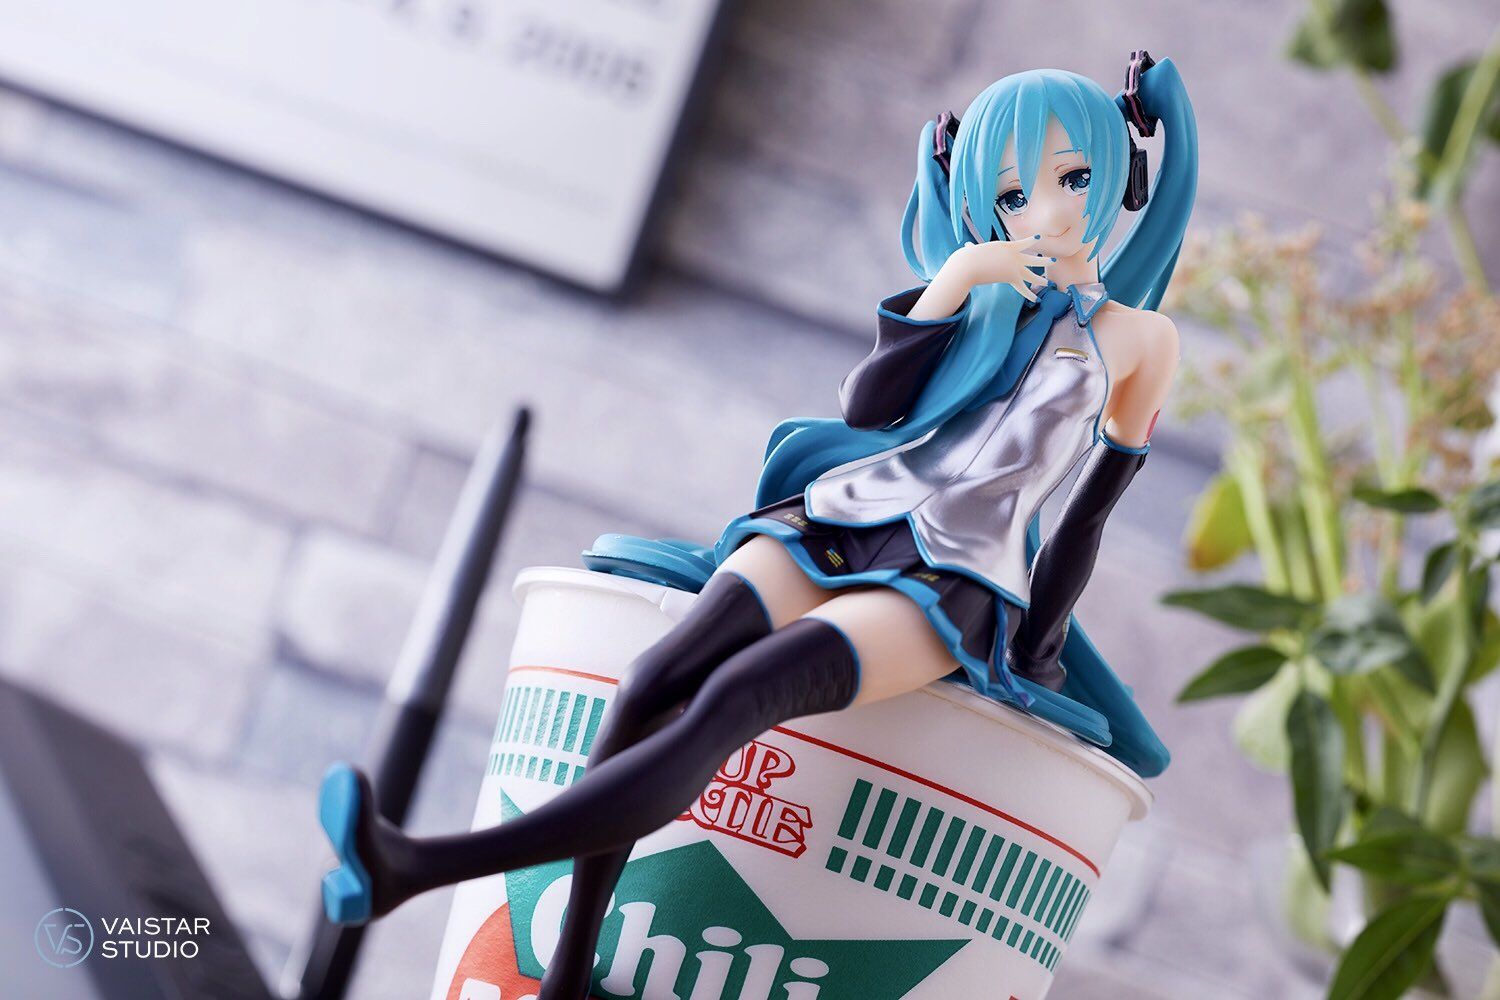 [Hatsune Miku] Nuyoru Stopper Figure, too much color and become a topic erotic 14